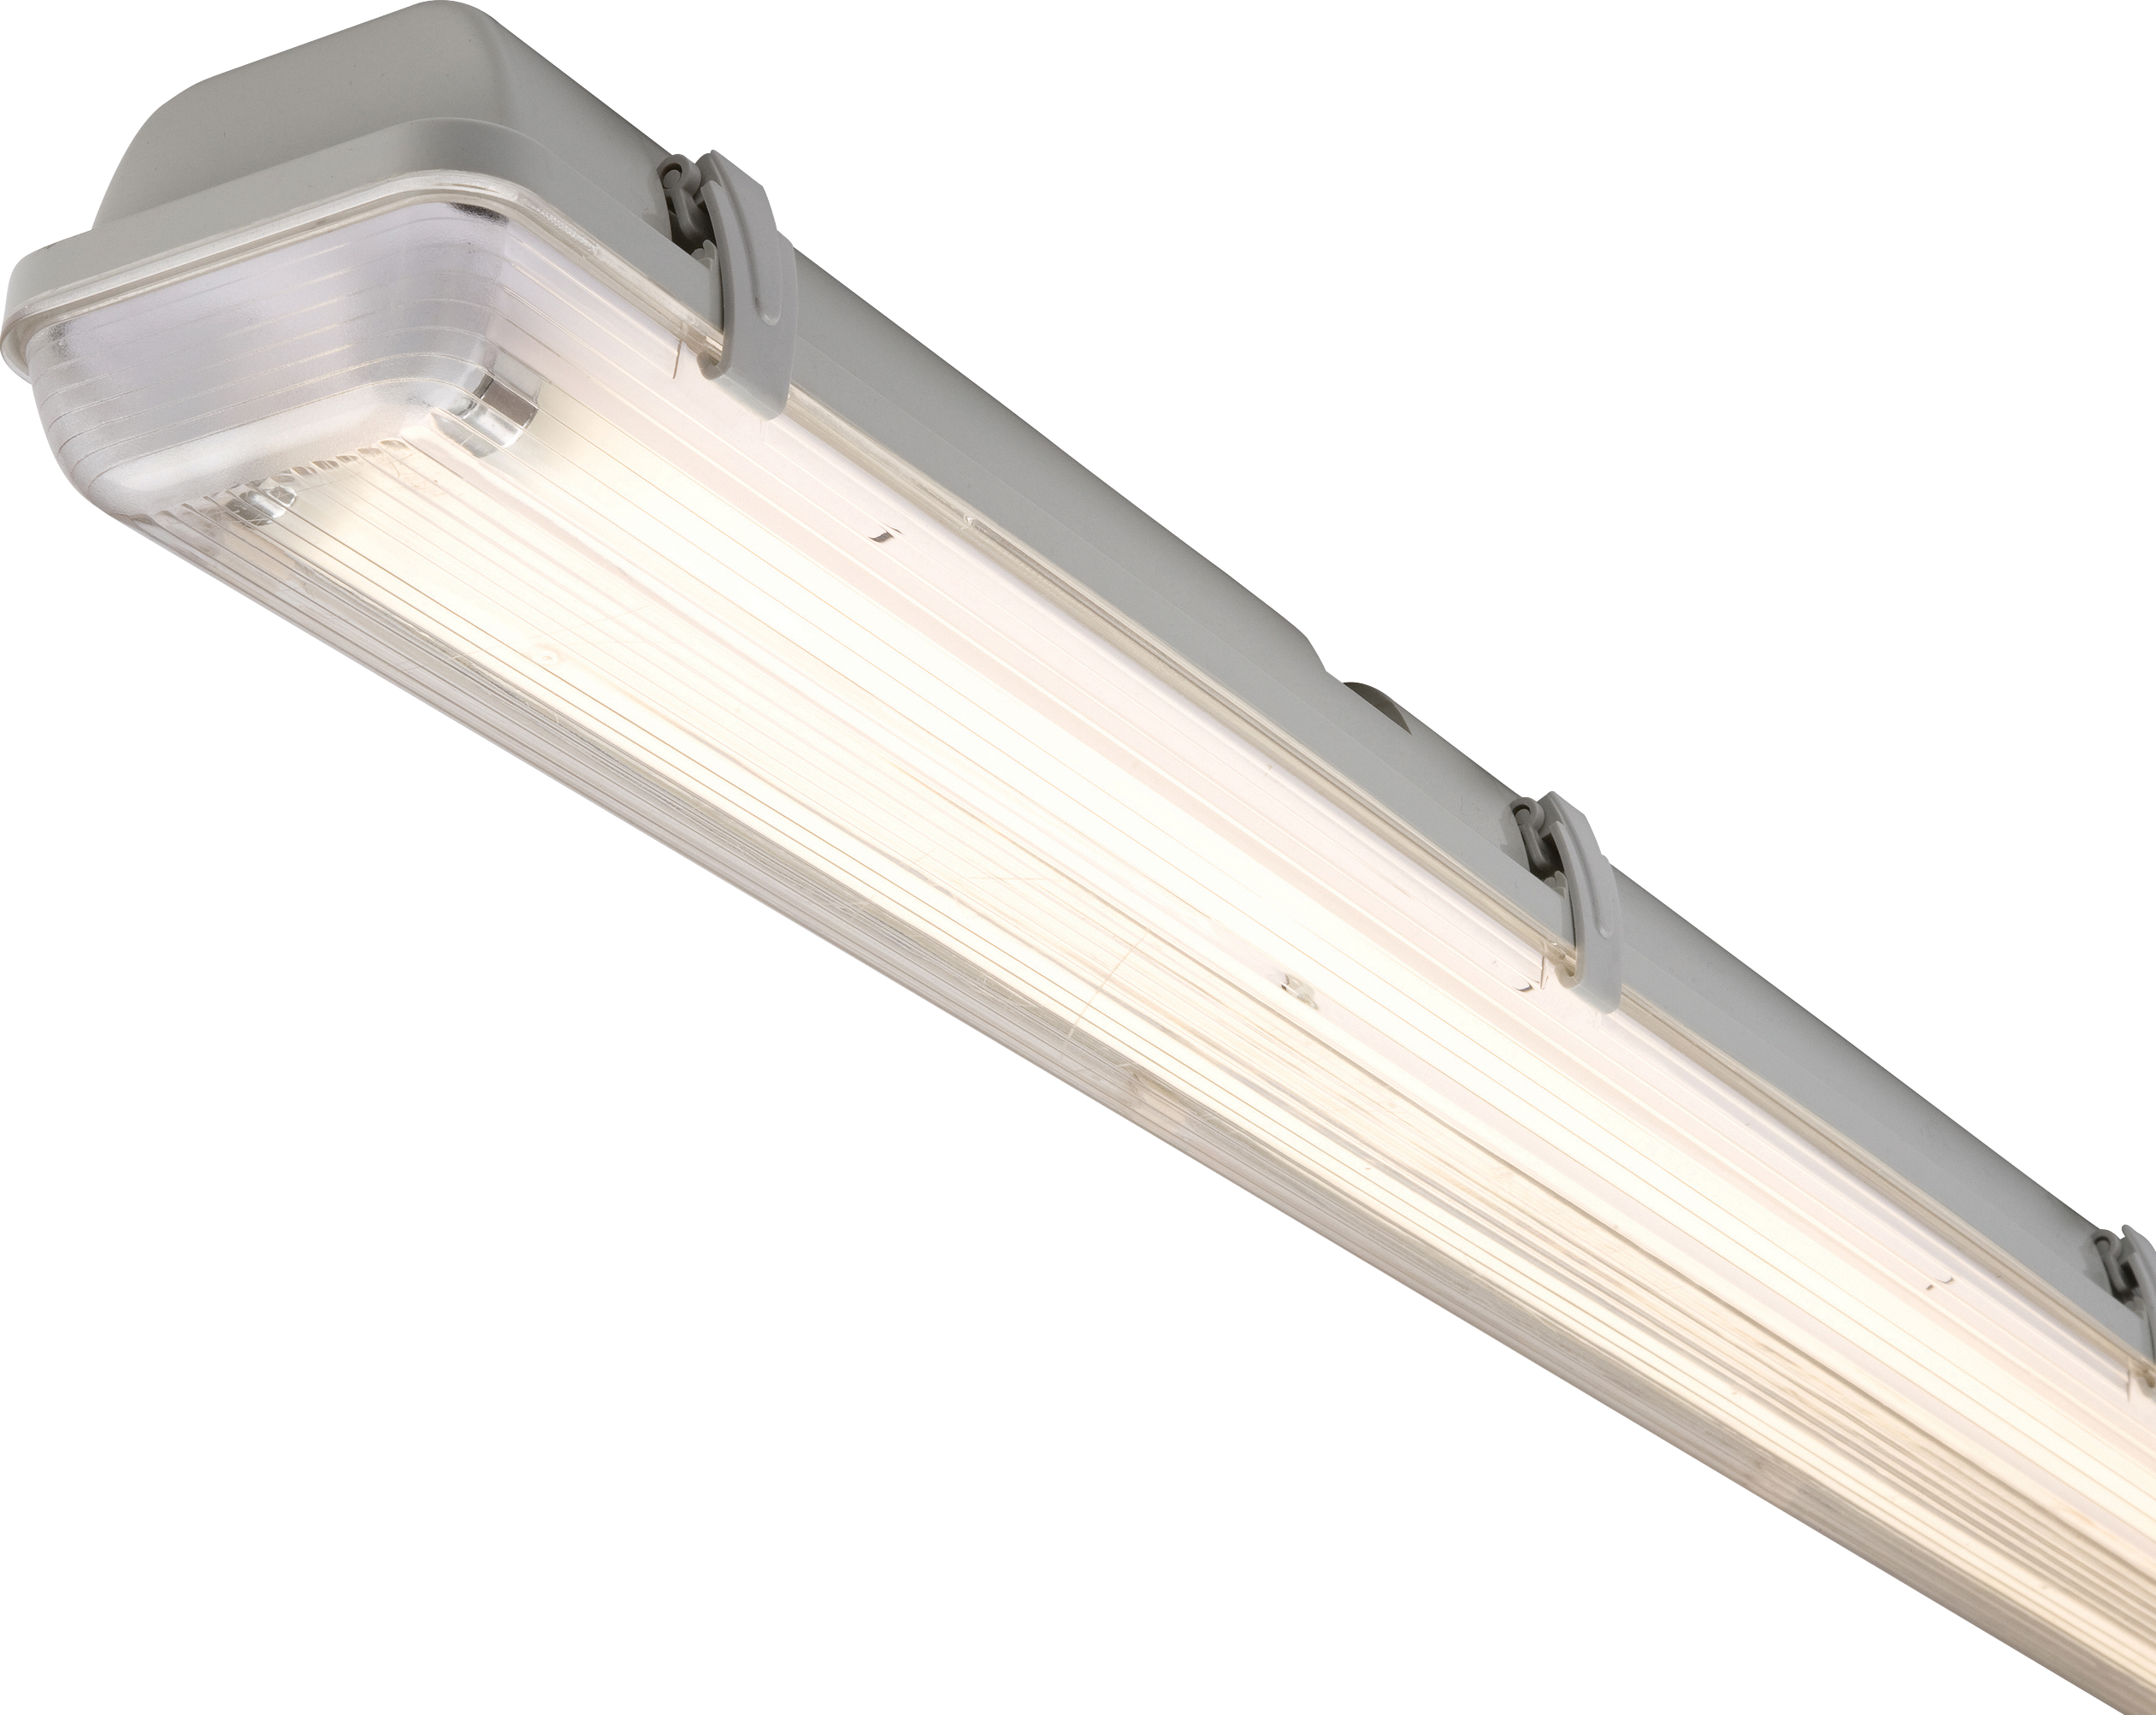 230V IP65 2X28W T5 HF Twin Non-Corrosive Fluorescent Fitting 4ft - NC65228HF 